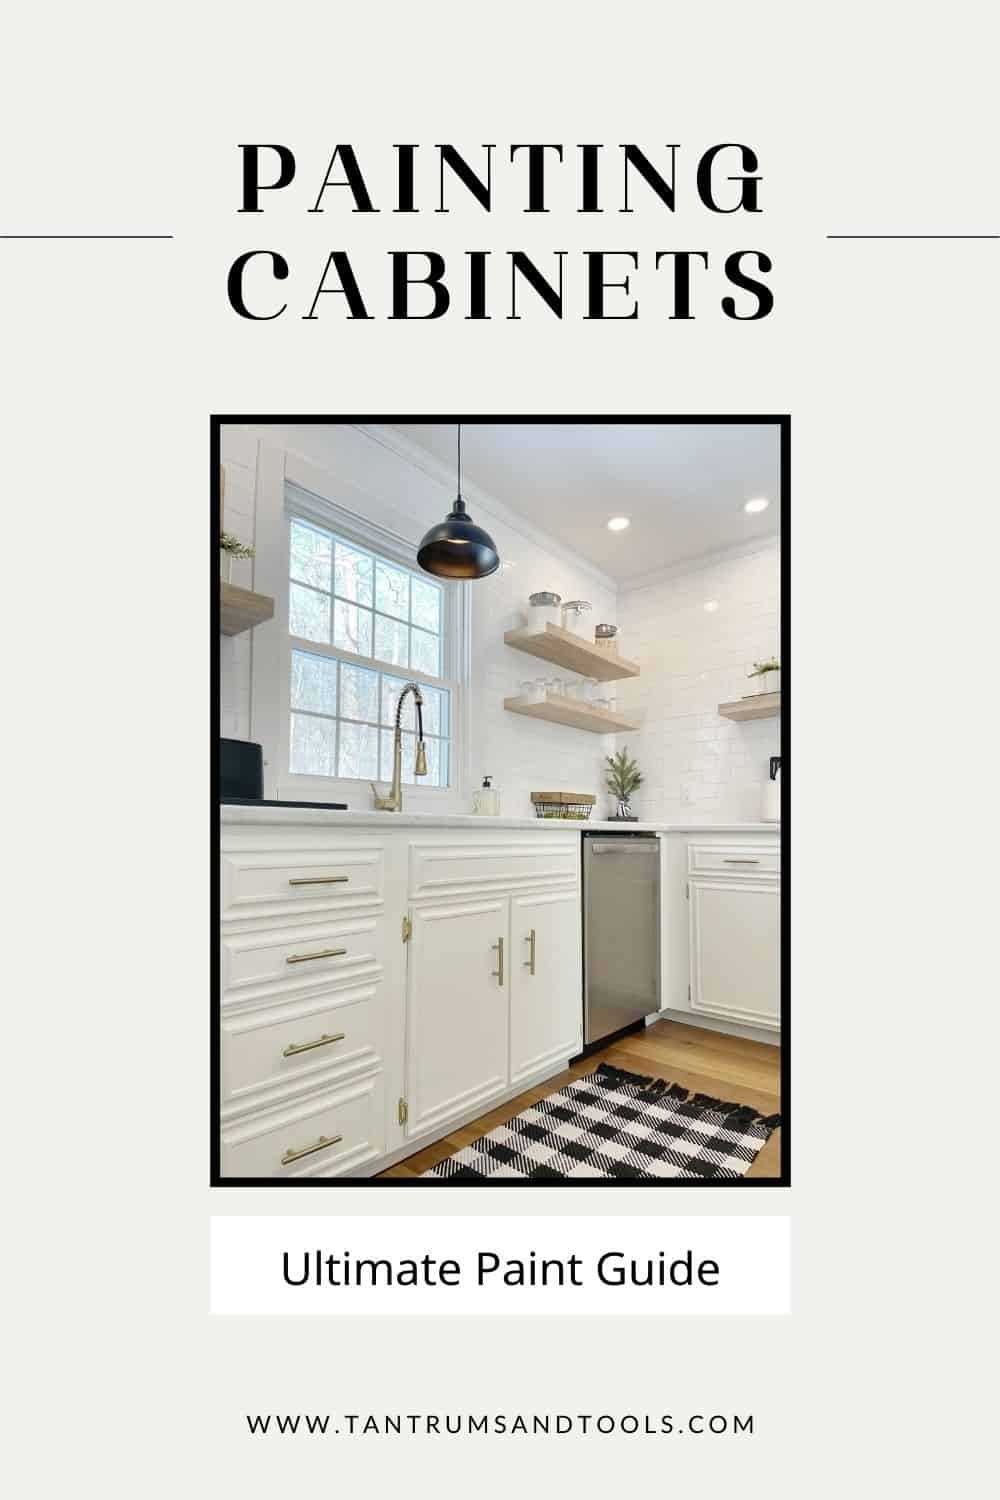 What is Cabinet Primer?